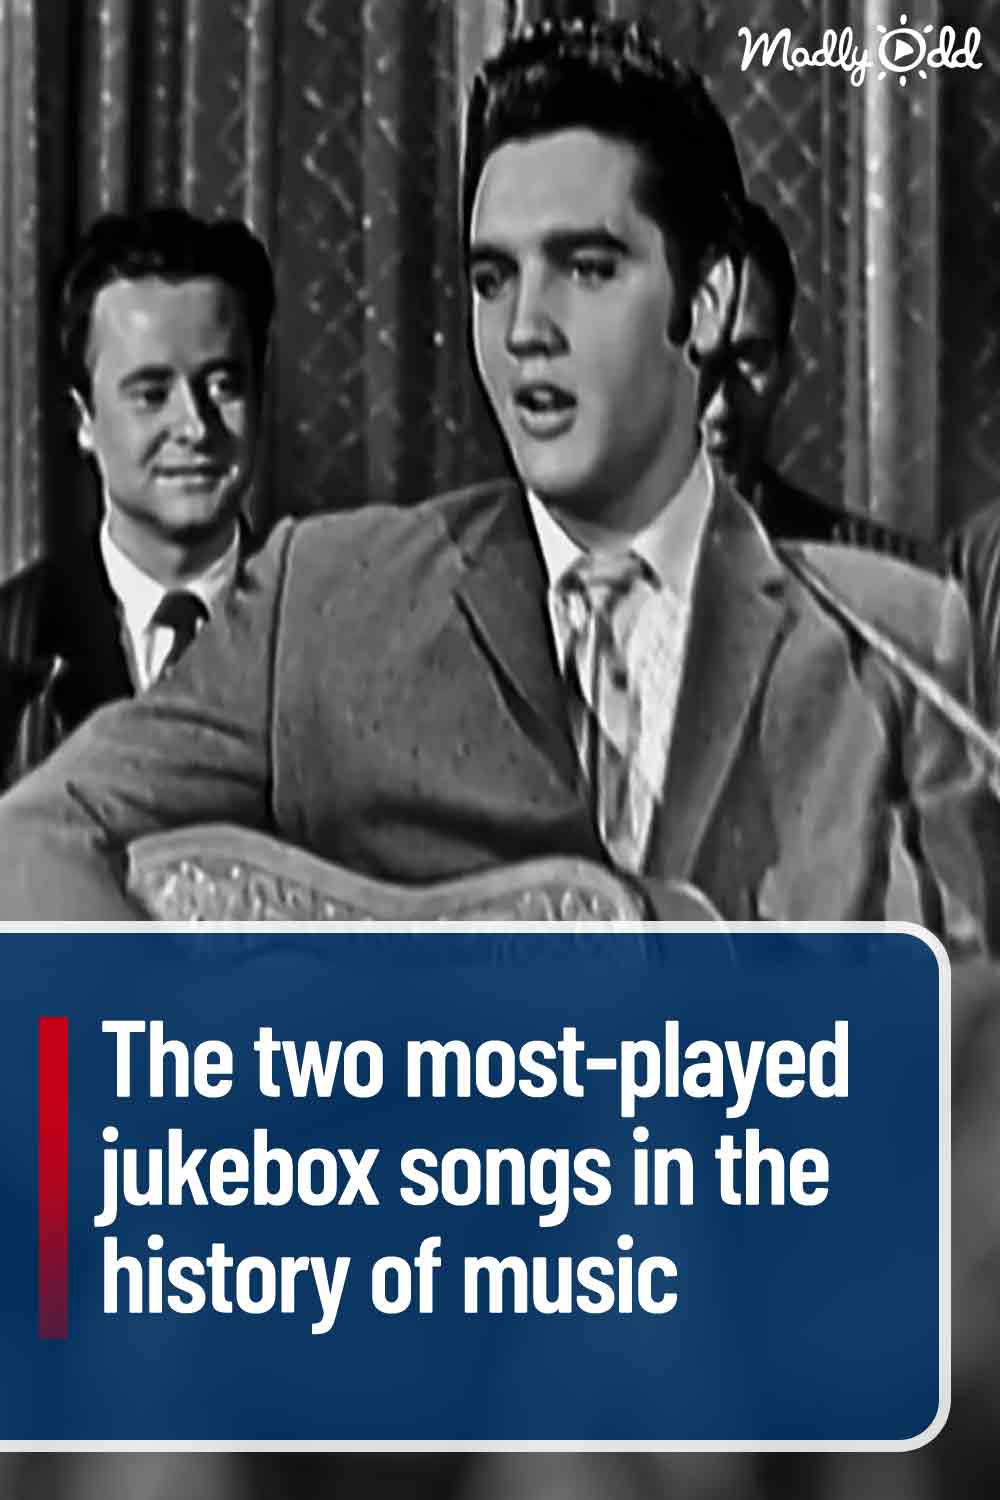 The two most-played jukebox songs in the history of music